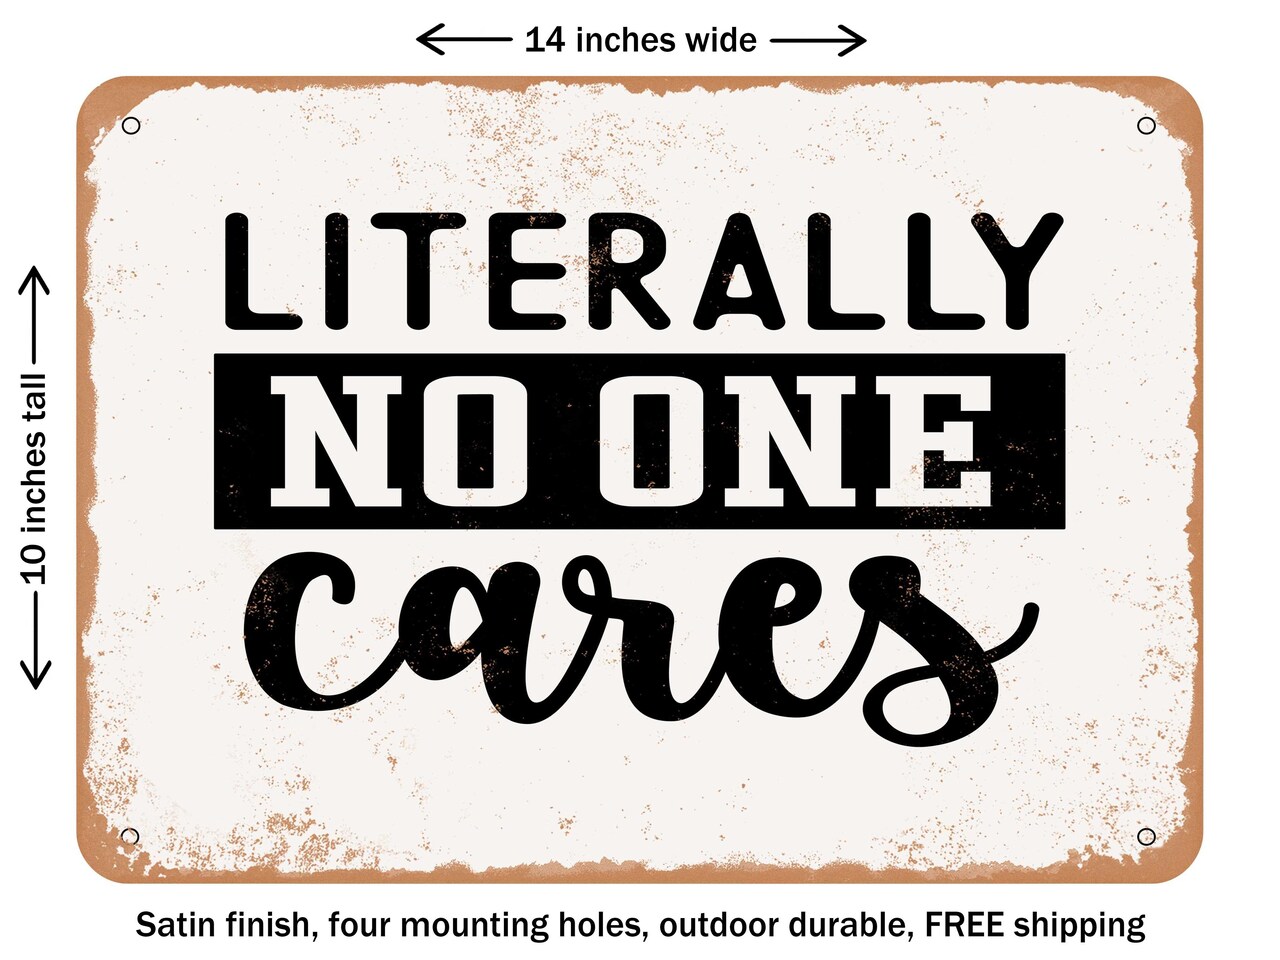 DECORATIVE METAL SIGN - Literally No One Cares - Vintage Rusty Look